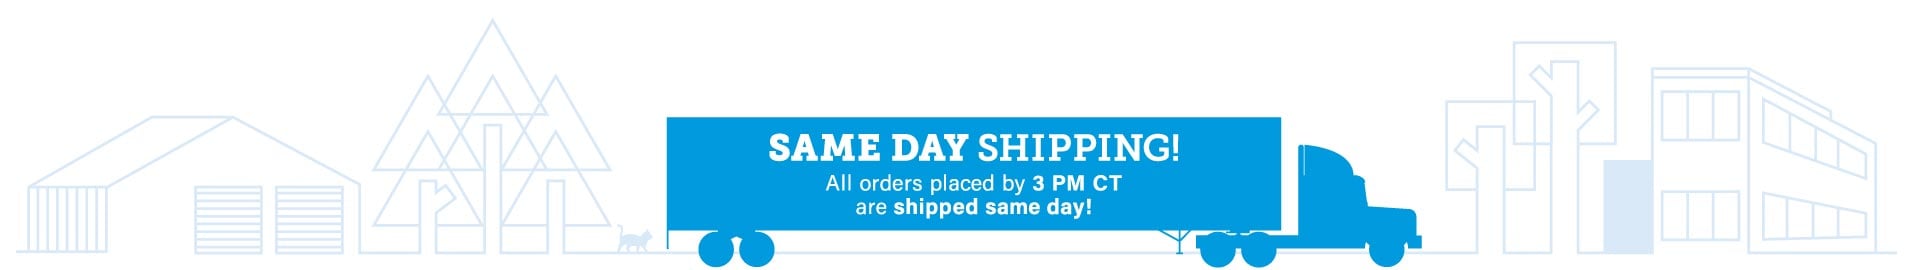 Same Day Shipping on all orders placed by 3pm ct